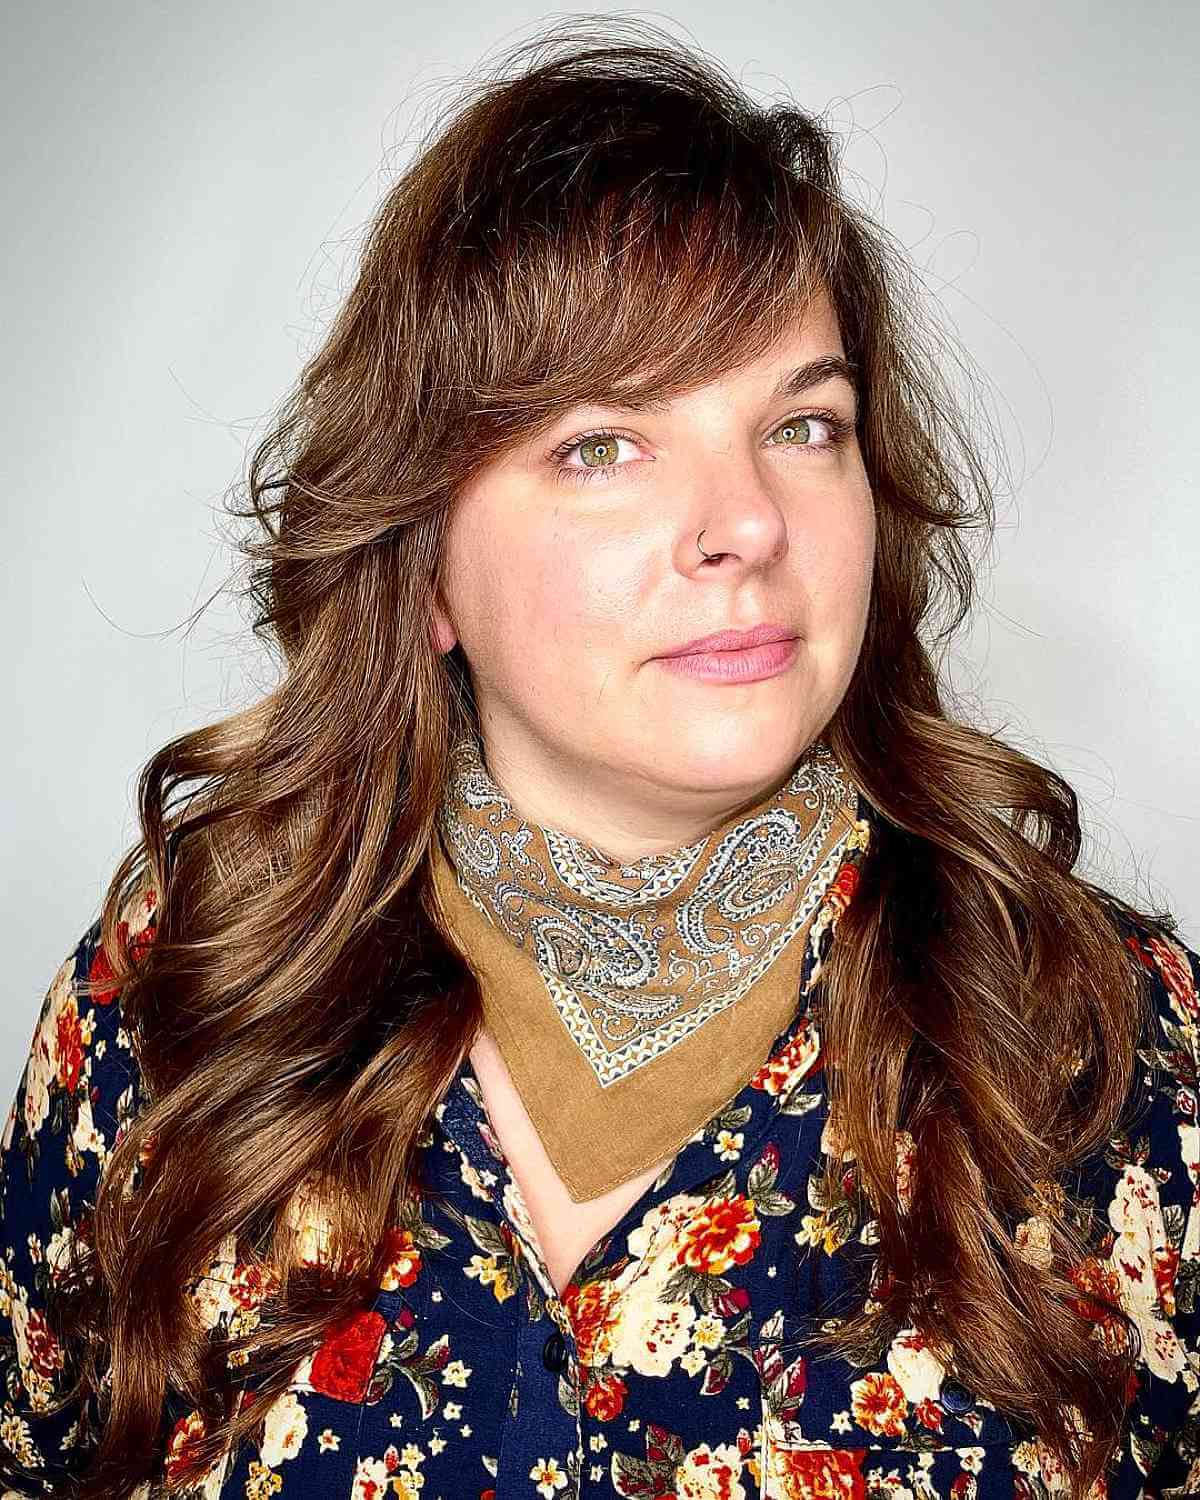 Side-Swept Bangs on Long Hair for Fat Faces in Their Forties